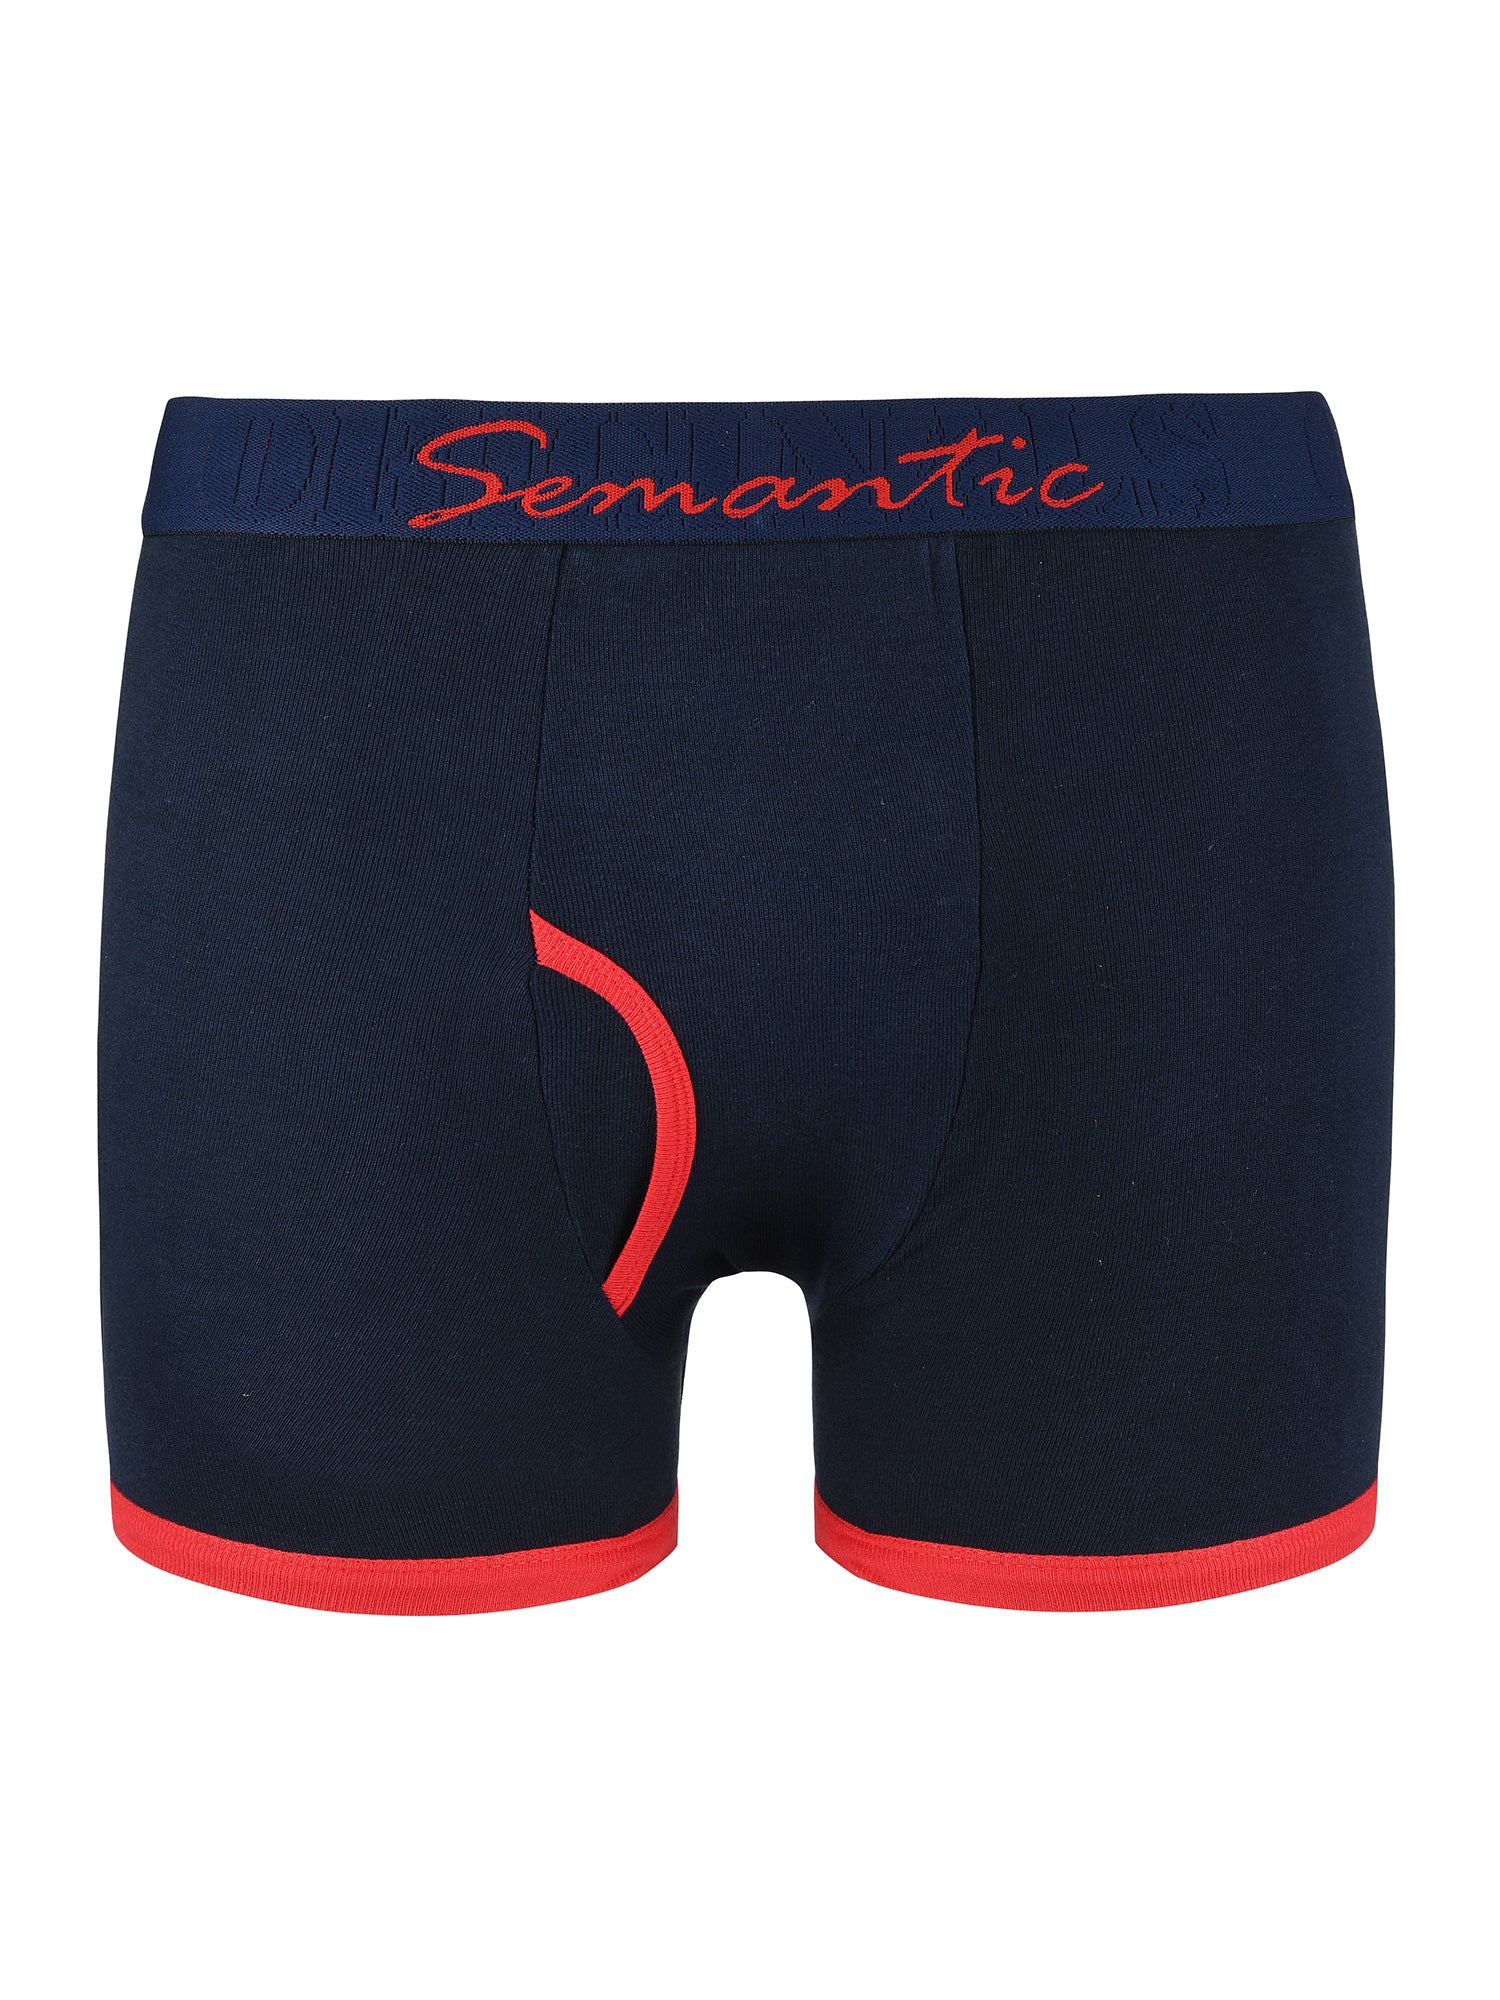 Semantic Cotton Designer Long Trunks (Boxer Briefs) with Fly - Solid